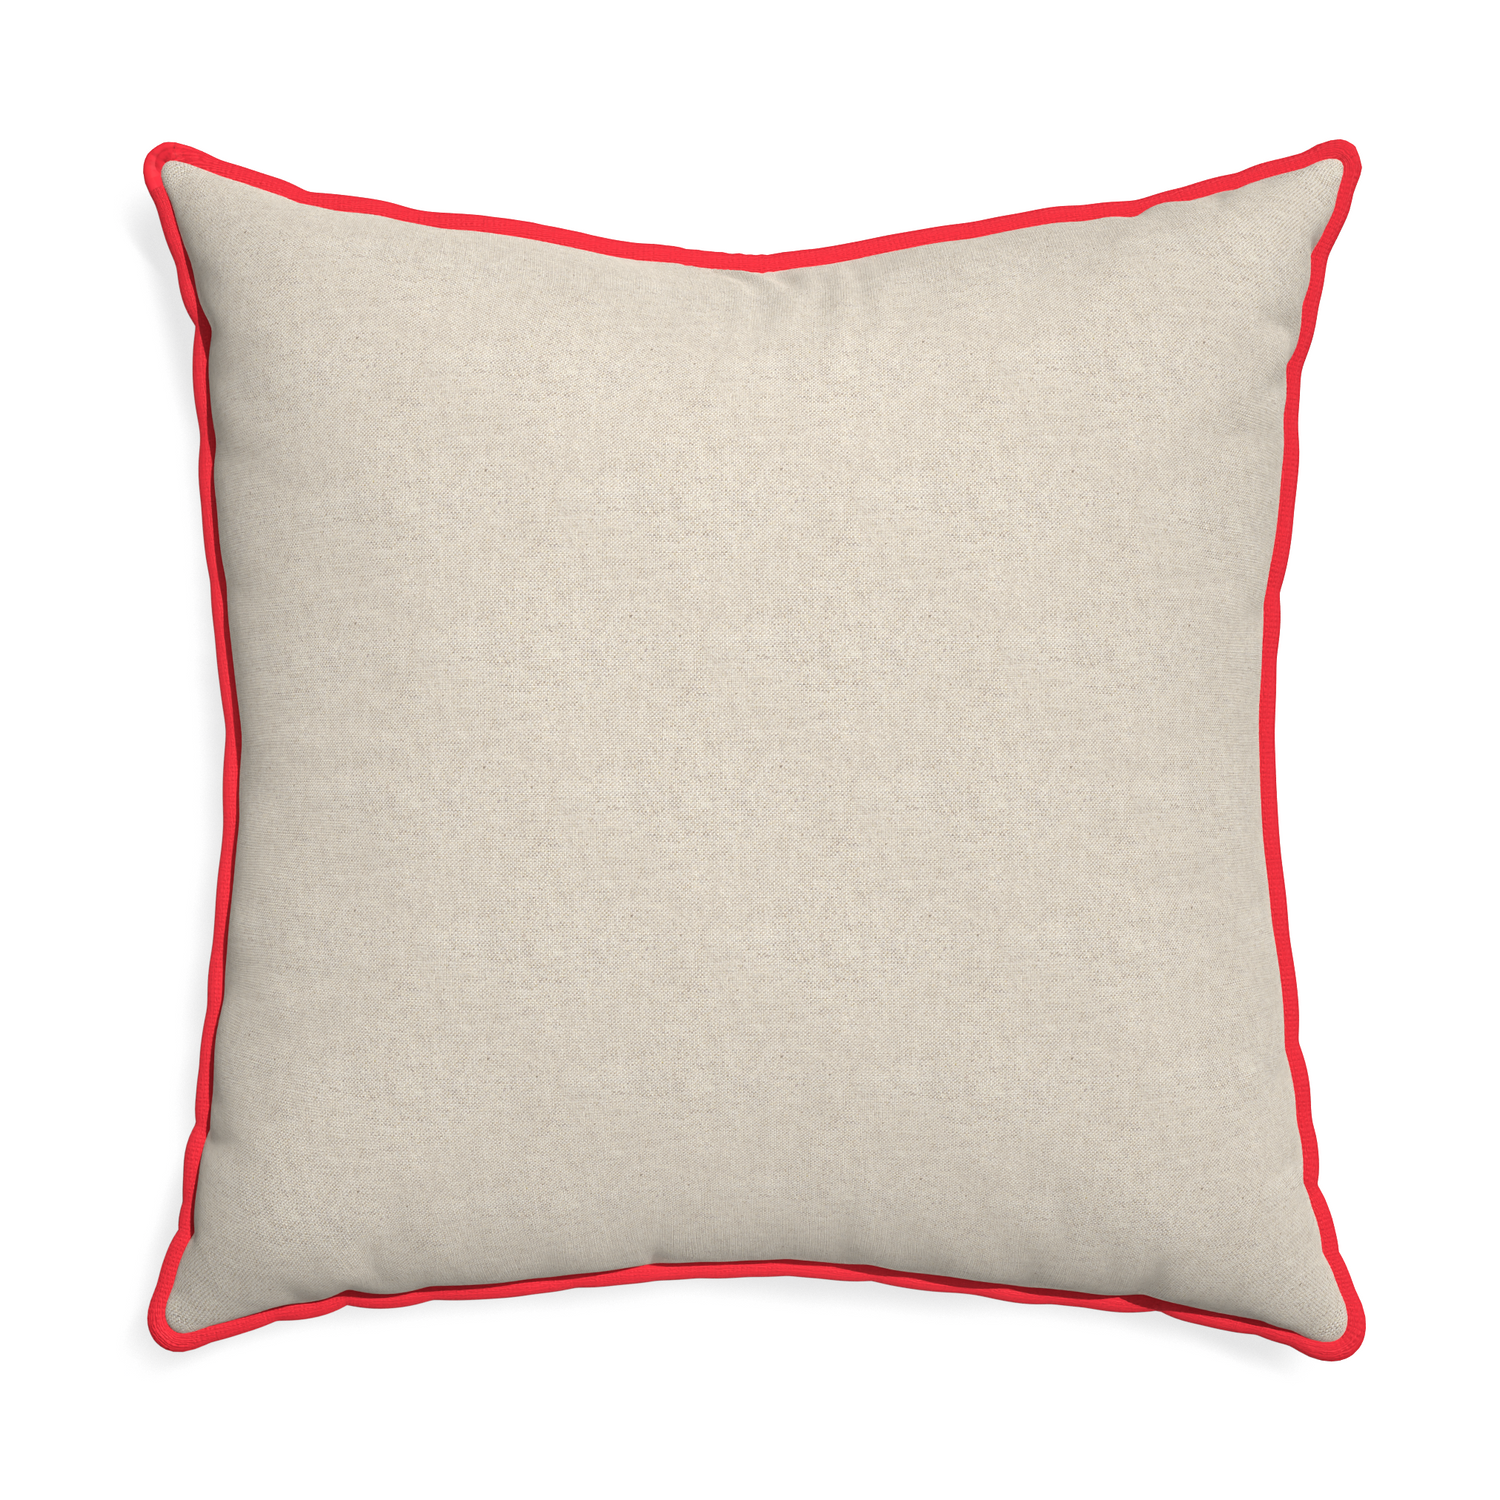 Euro-sham oat custom pillow with cherry piping on white background